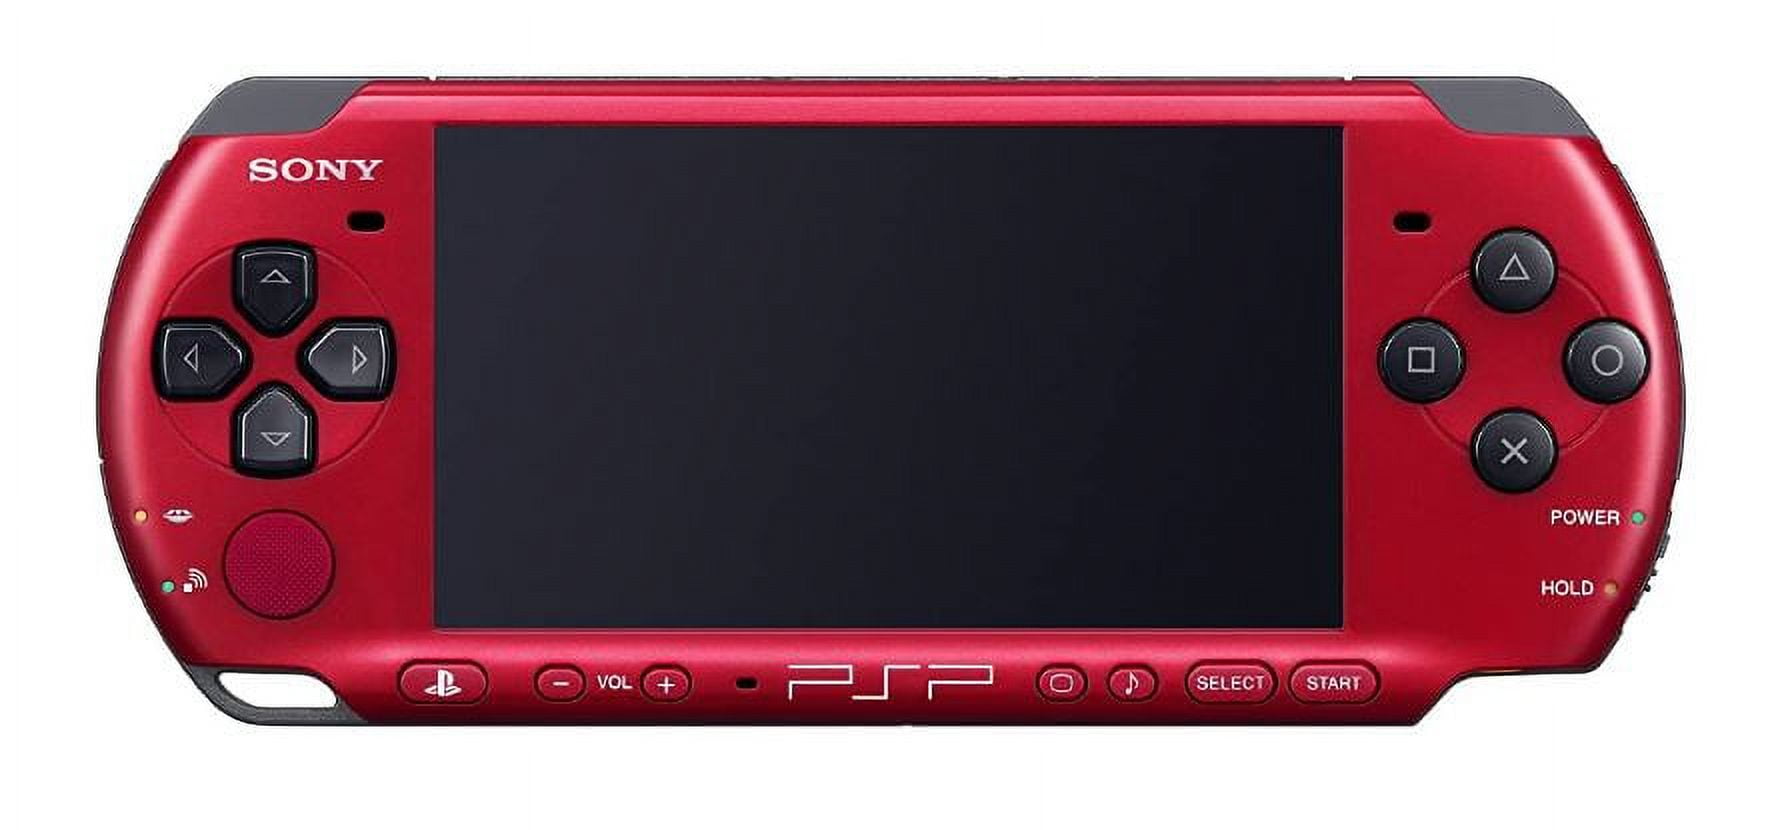 Authentic Playstation PSP 3000 Console - Red/Black - 100% OEM